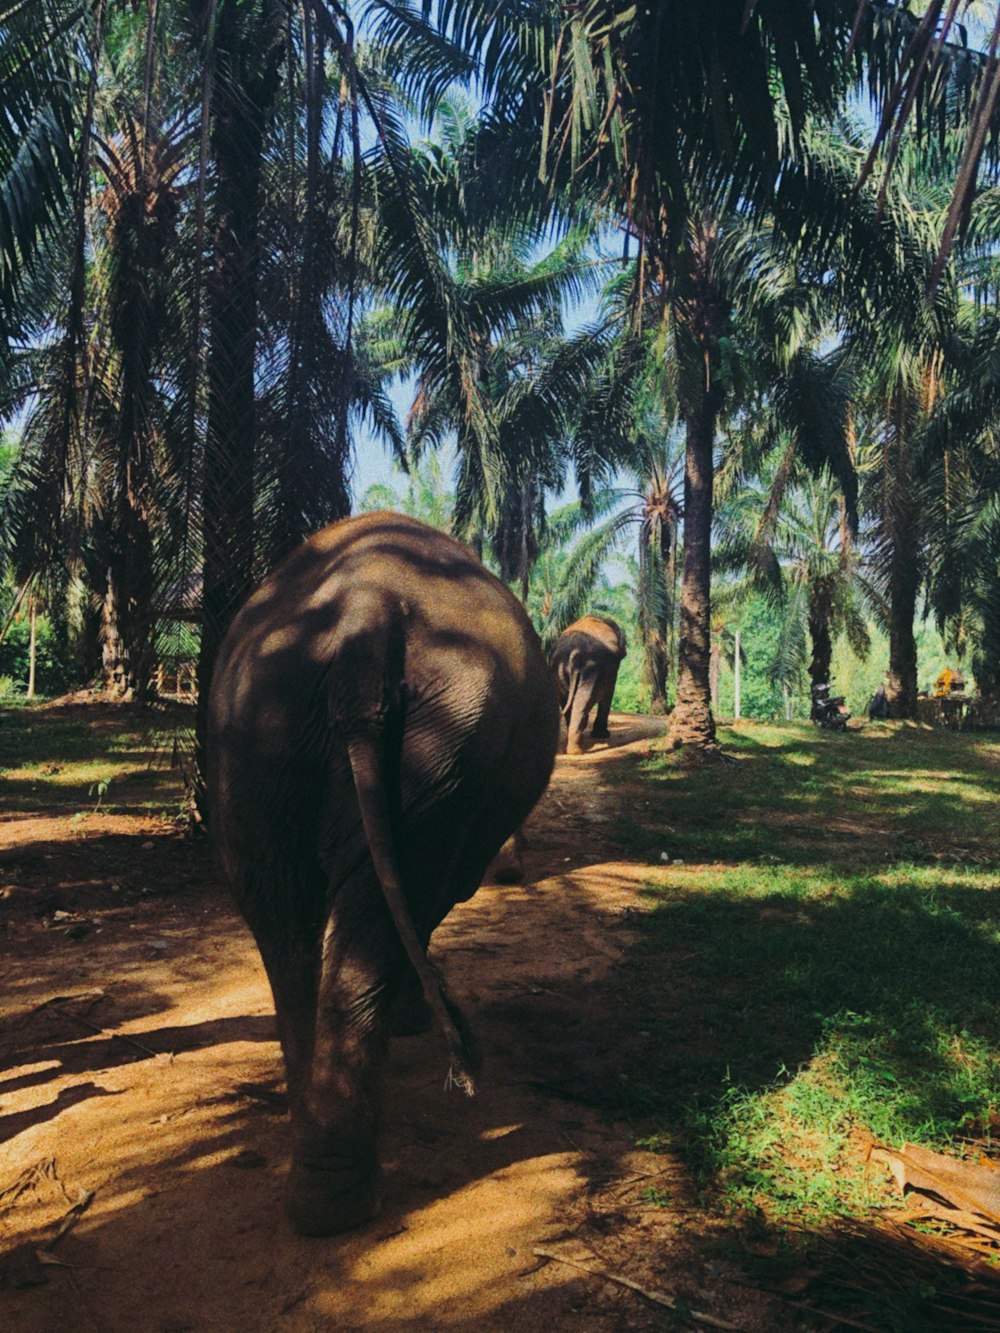 an elephant walking down a dirt road next to palm trees